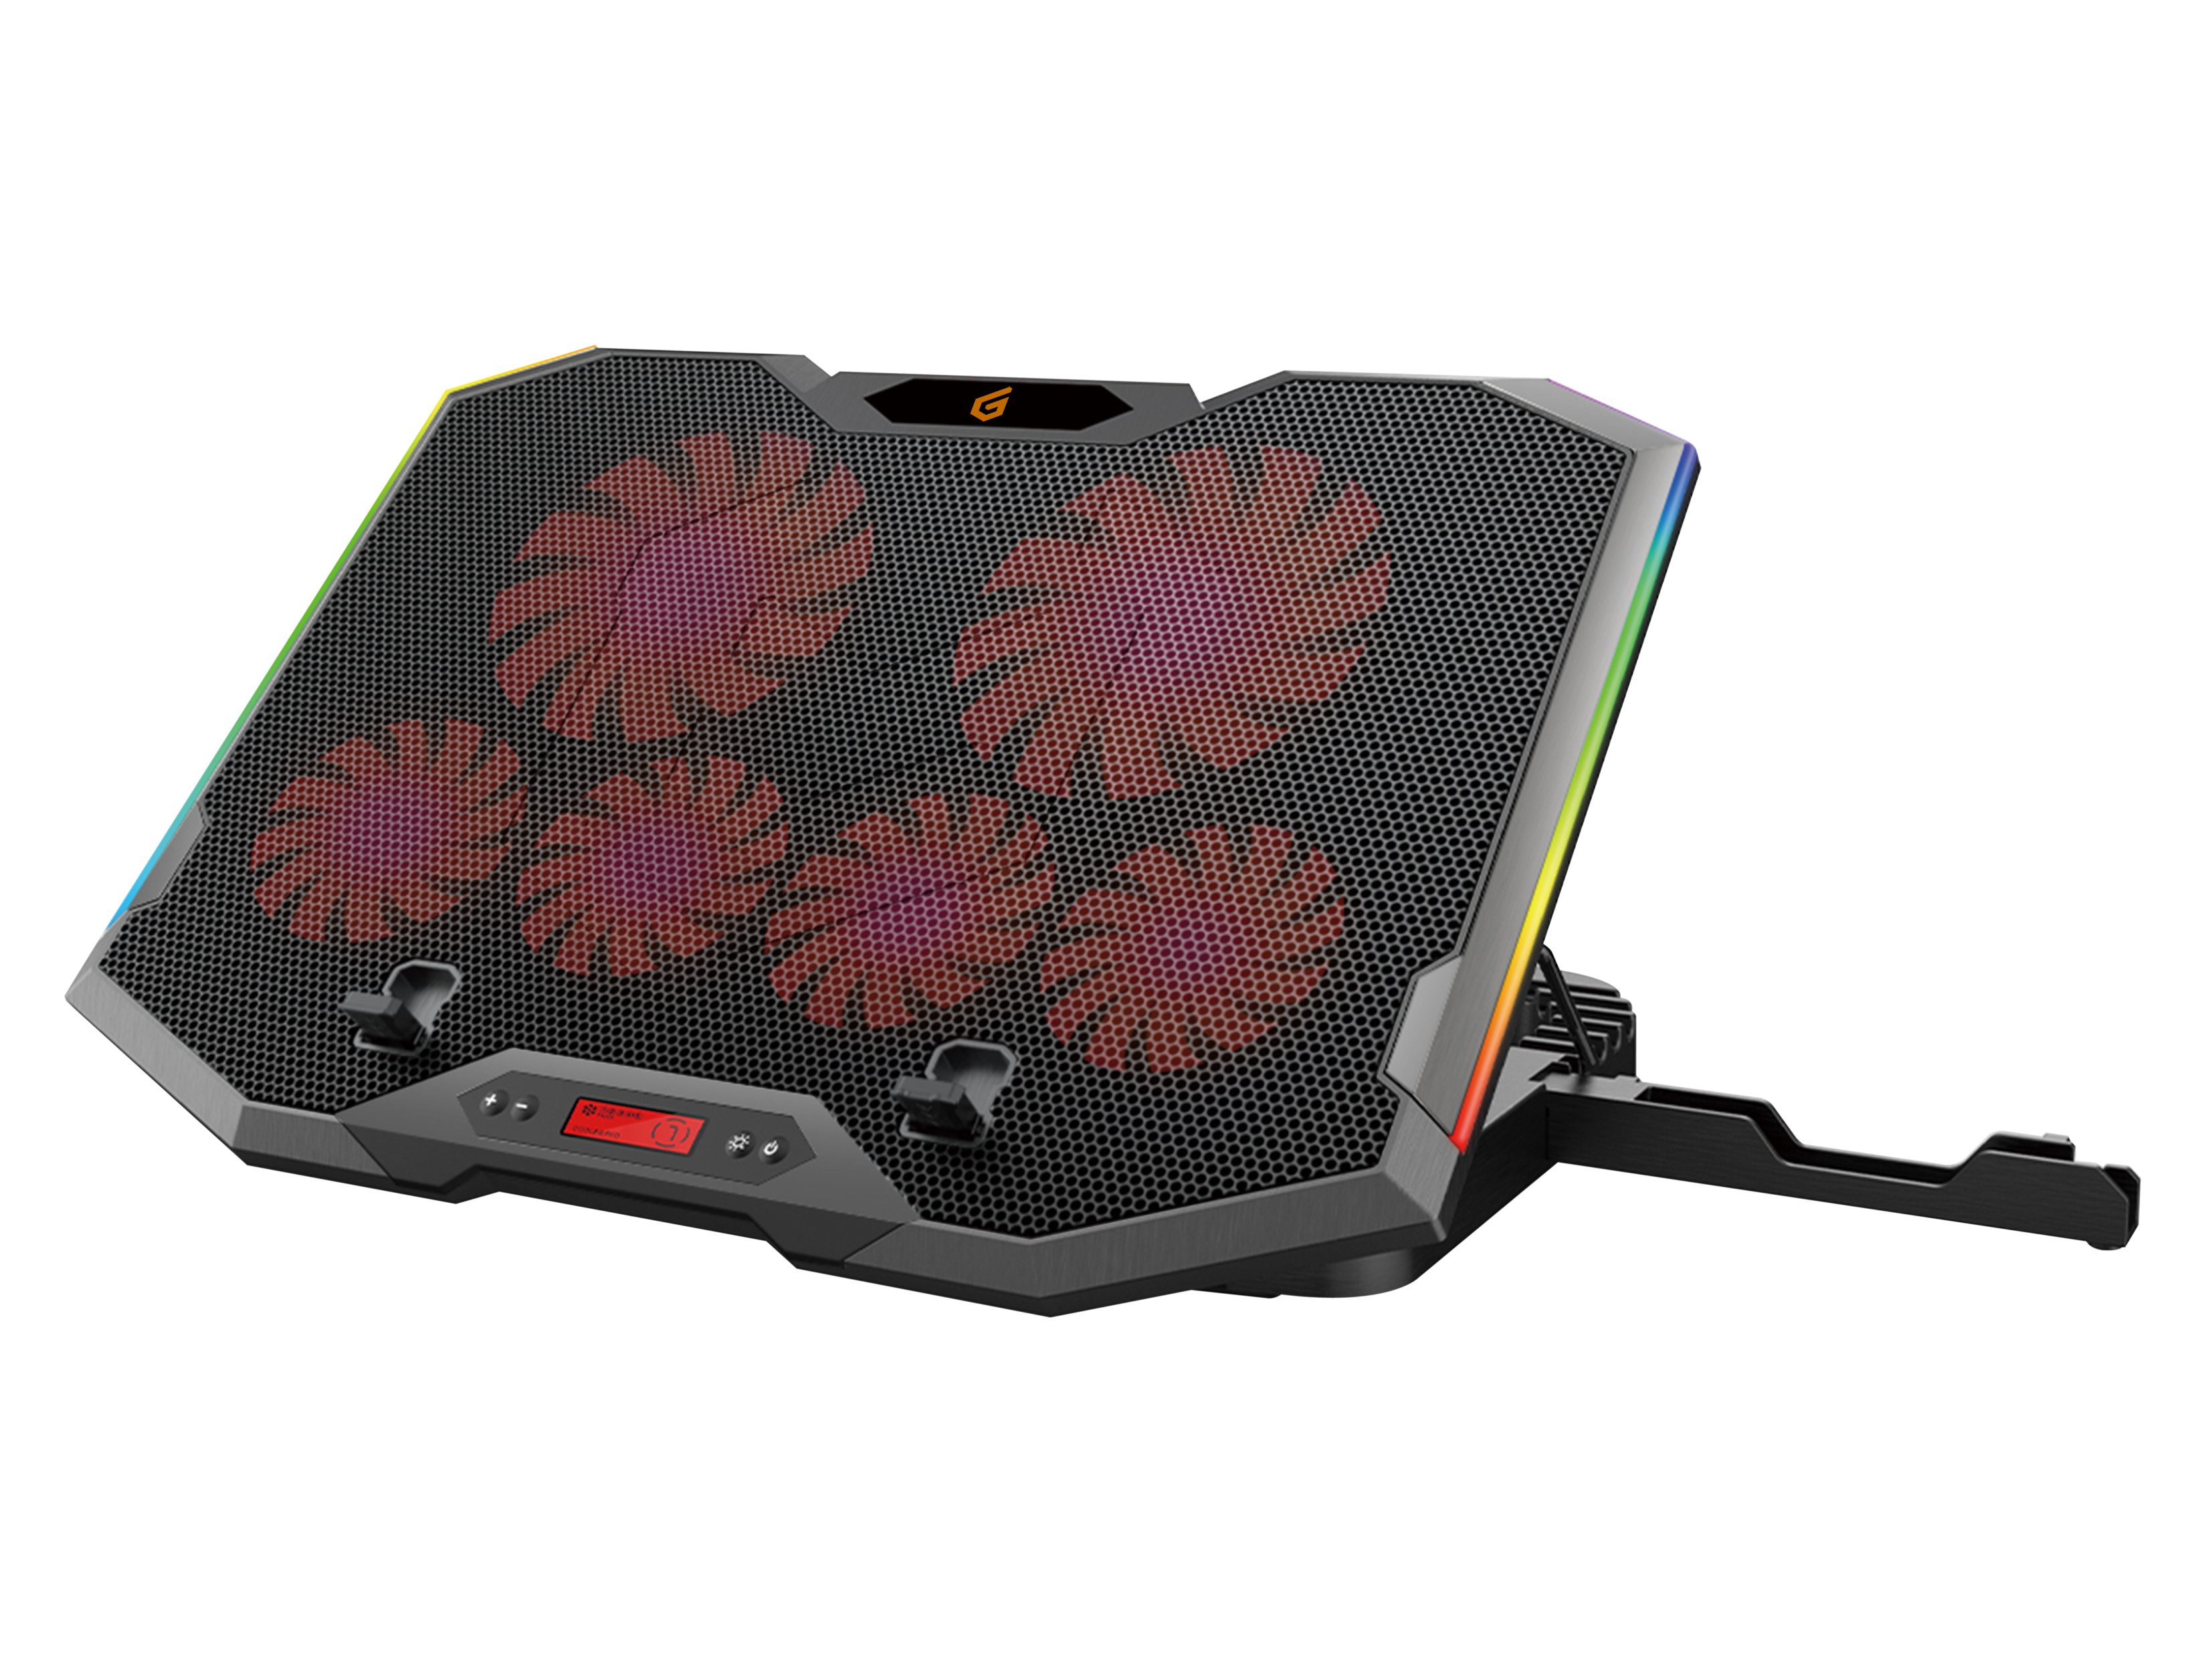 CONCEPTRONIC 6-Fan Cooling Pad 43,2 cm (17.0"), Gaming